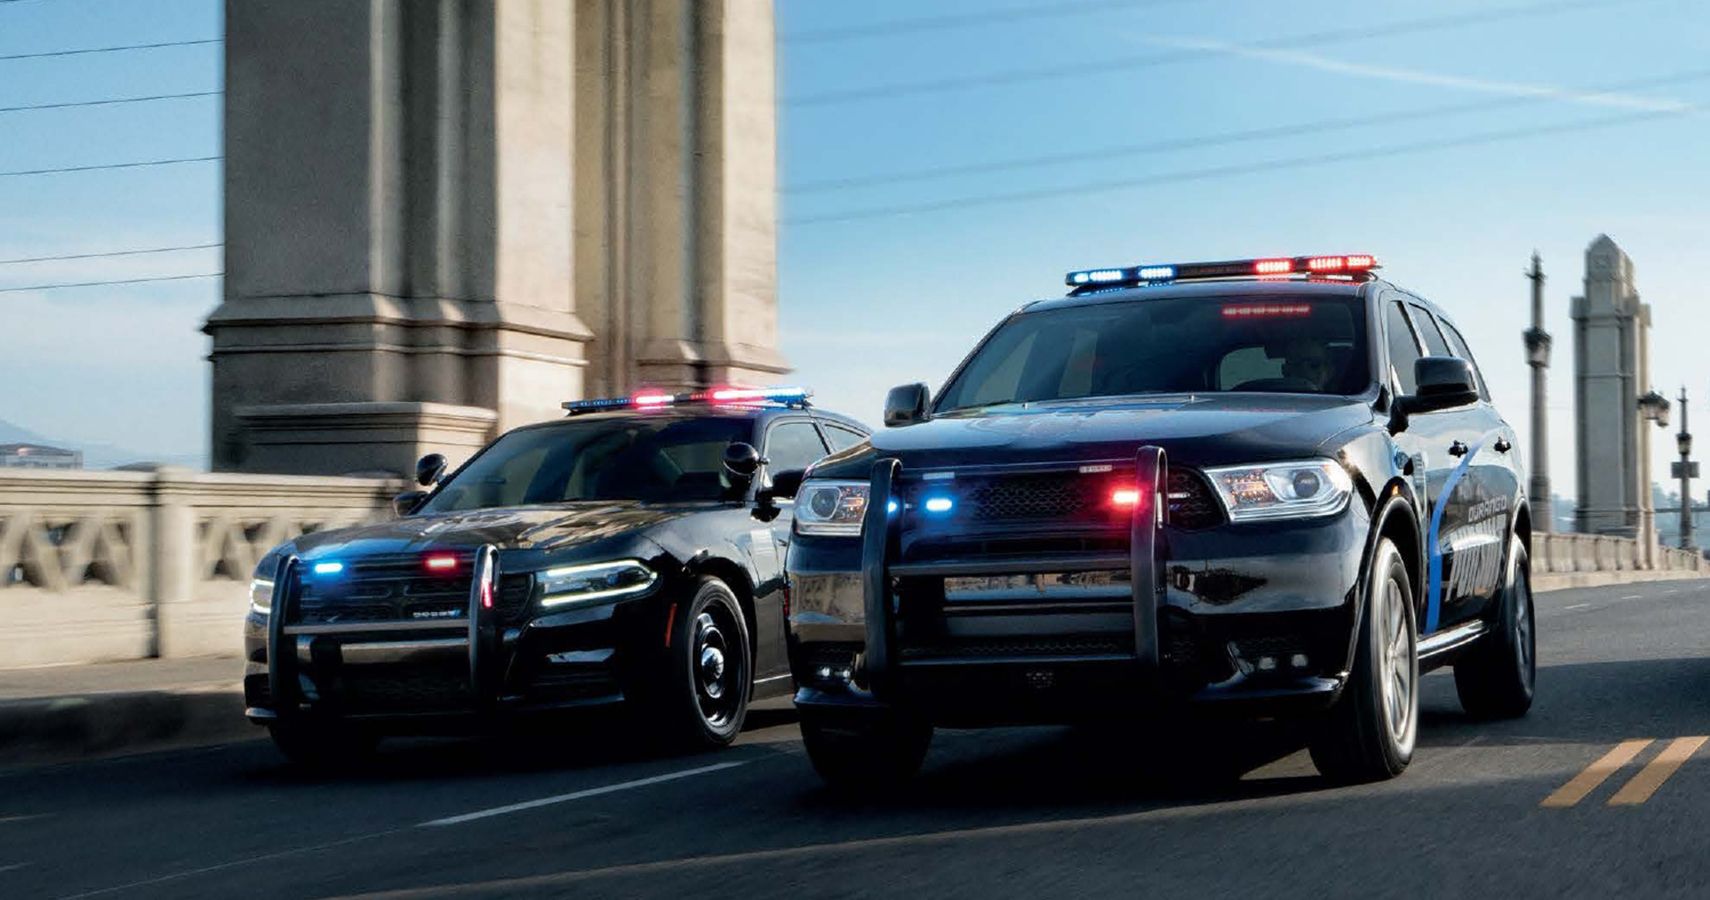 2021 Dodge Charger And Durango Pursuit Vehicles Reporting For Duty